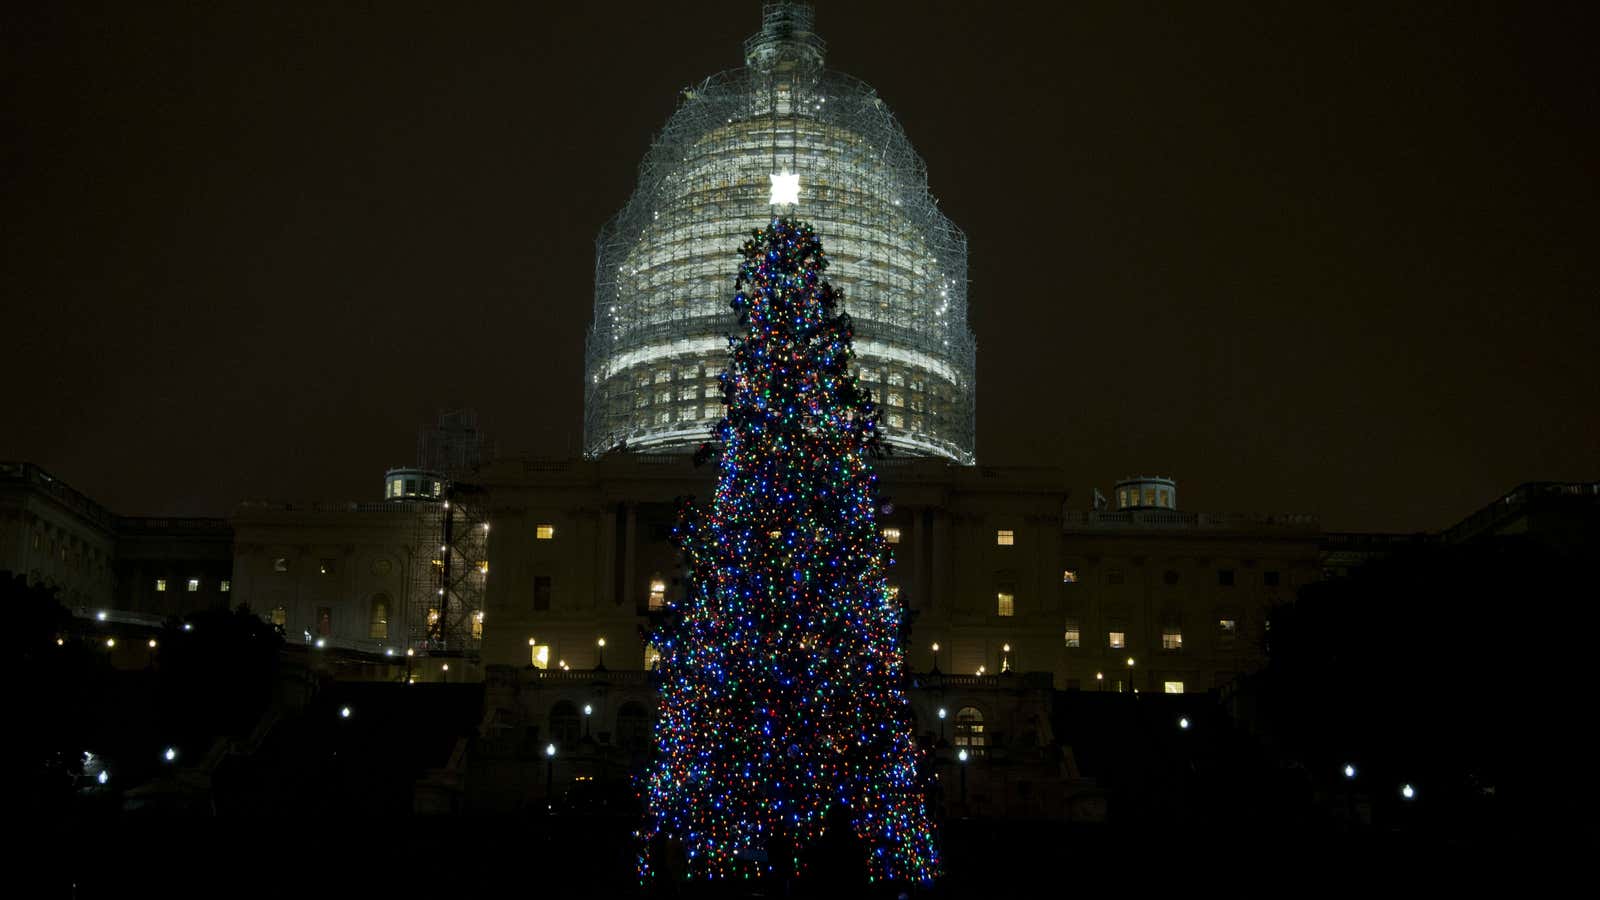 Congress is trying really hard not to ruin Christmas.